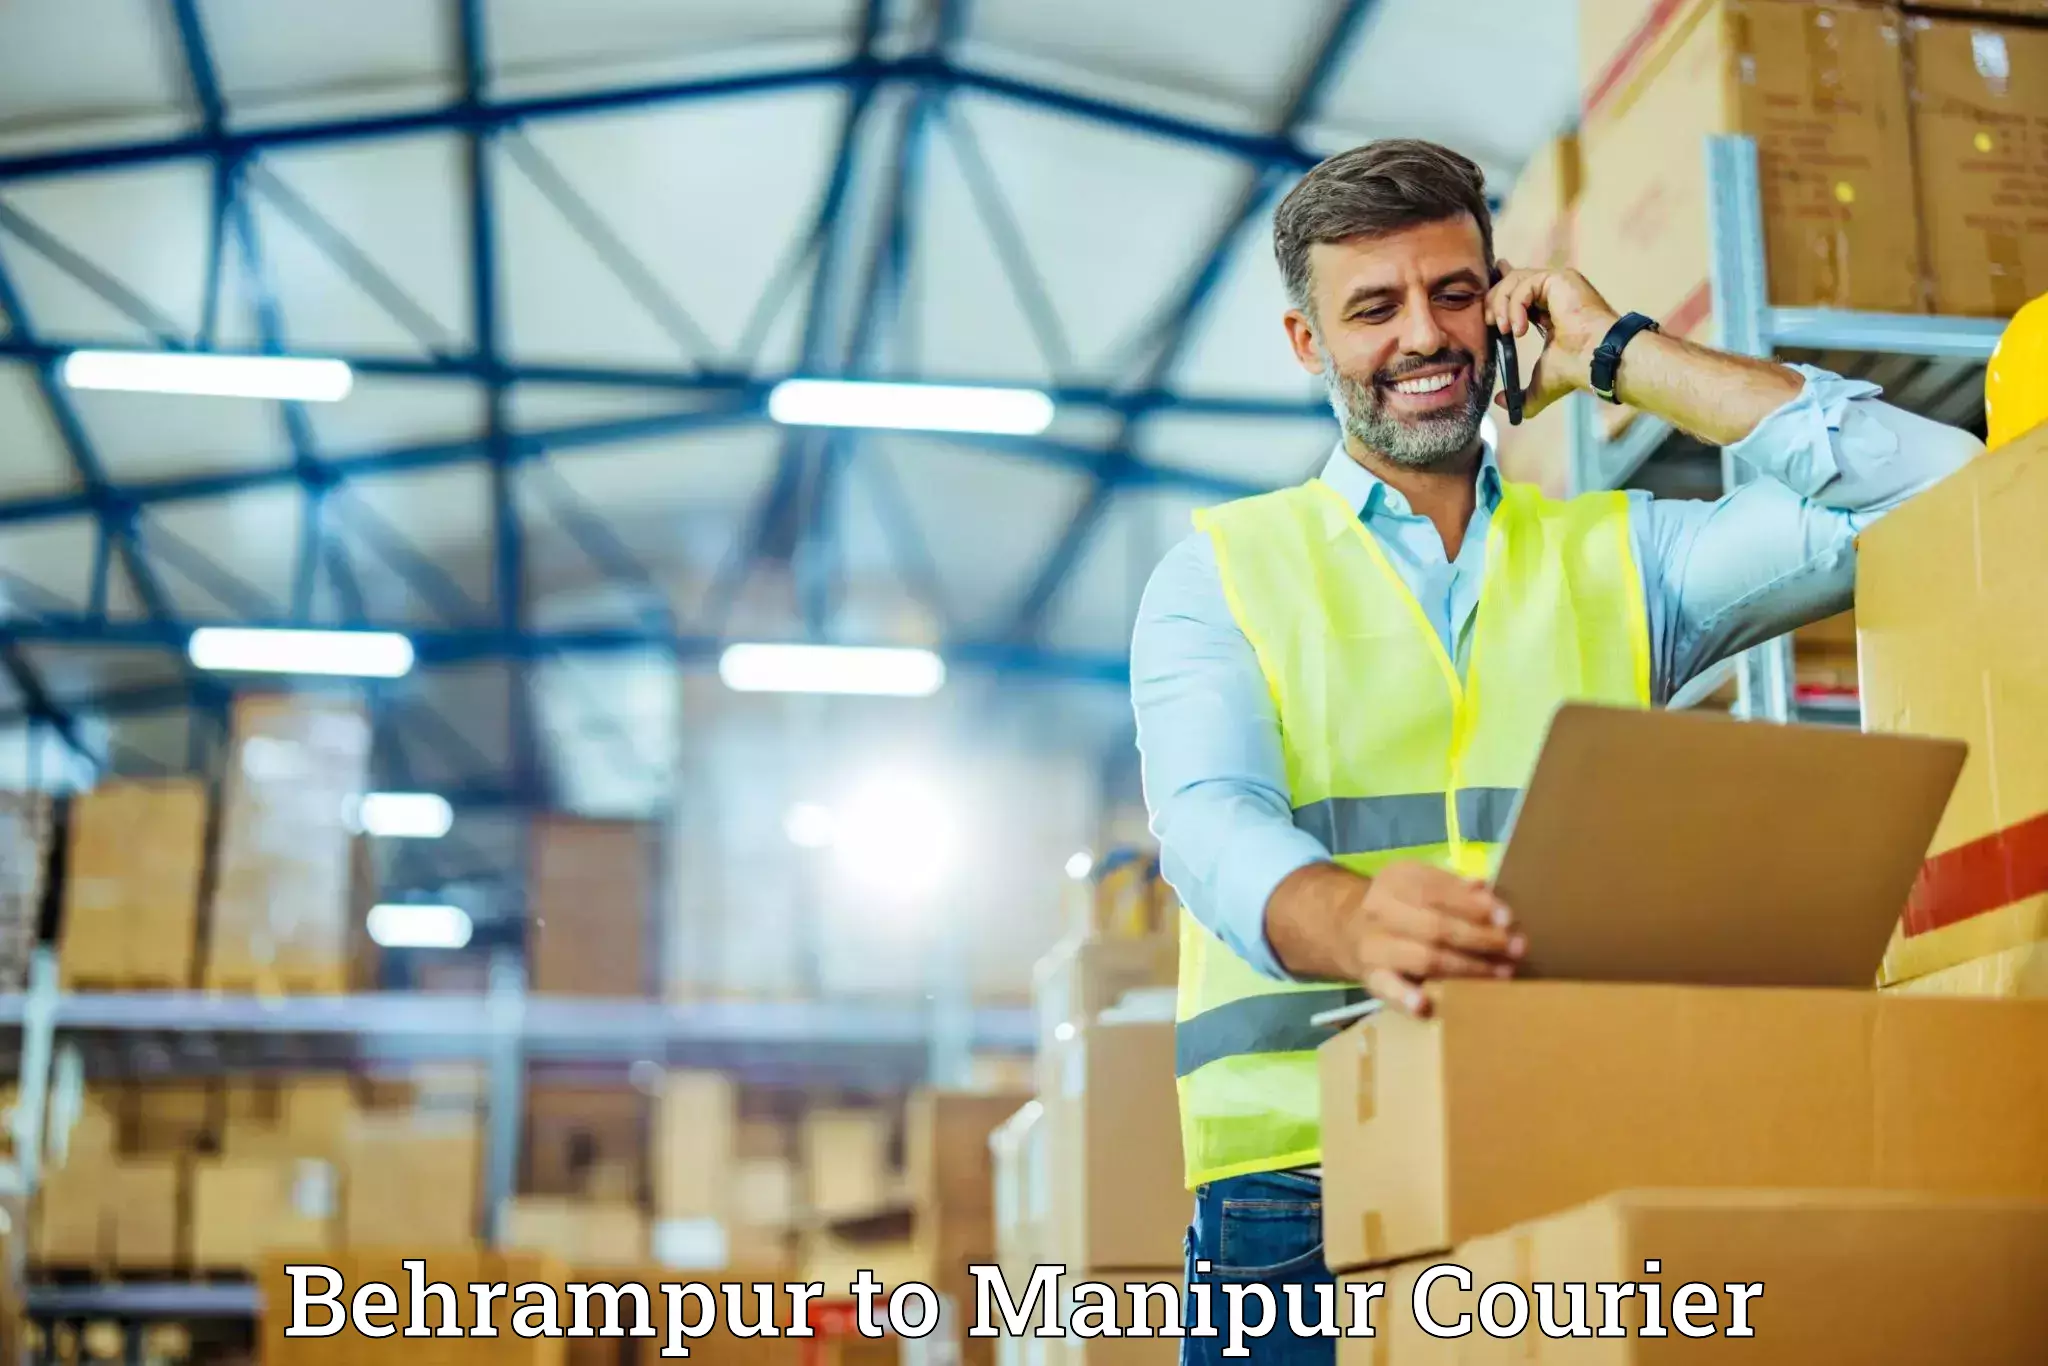 Furniture transport specialists Behrampur to Imphal